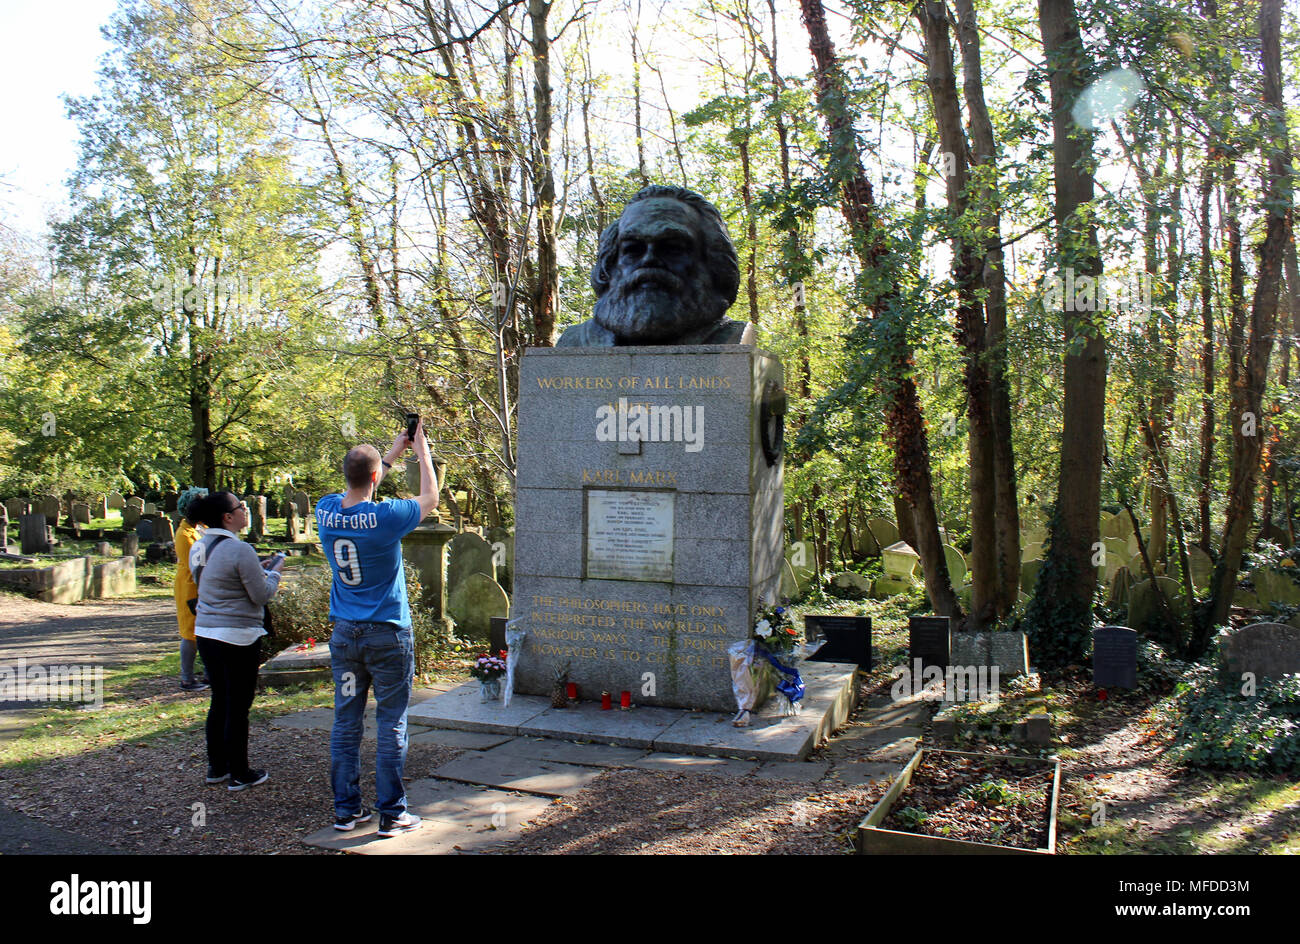 27 October 2017, Great Britain, London: Visitors photograph the grave of Karl Marx at Highgate cemetary in London. The bust was errected by the communist party of Great Britain in 1956. Photo: Christoph Driessen/dpa Stock Photo